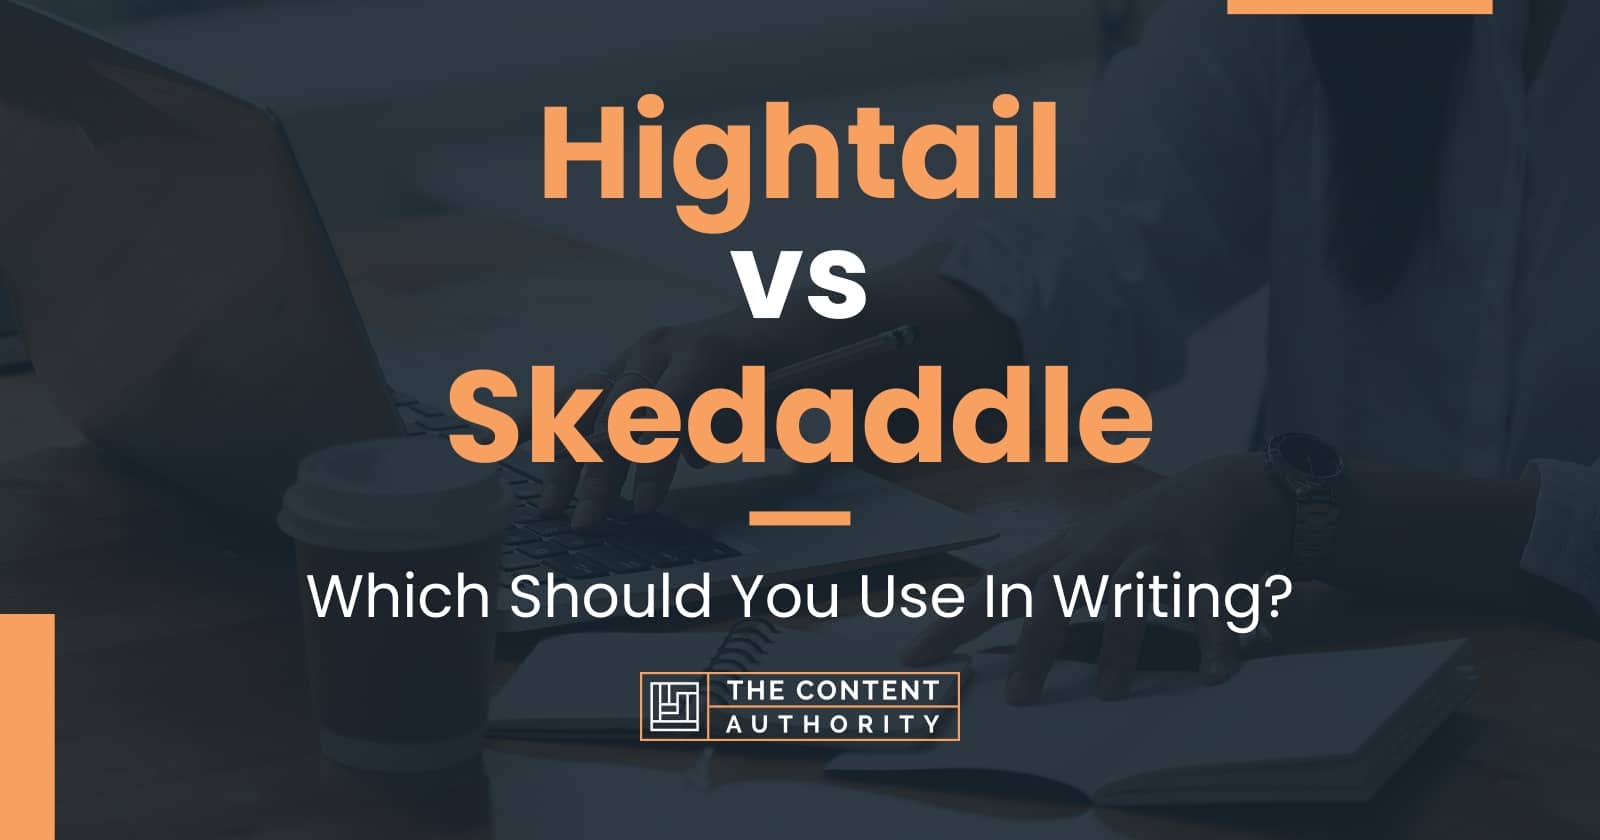 Hightail vs Skedaddle: Which Should You Use In Writing?